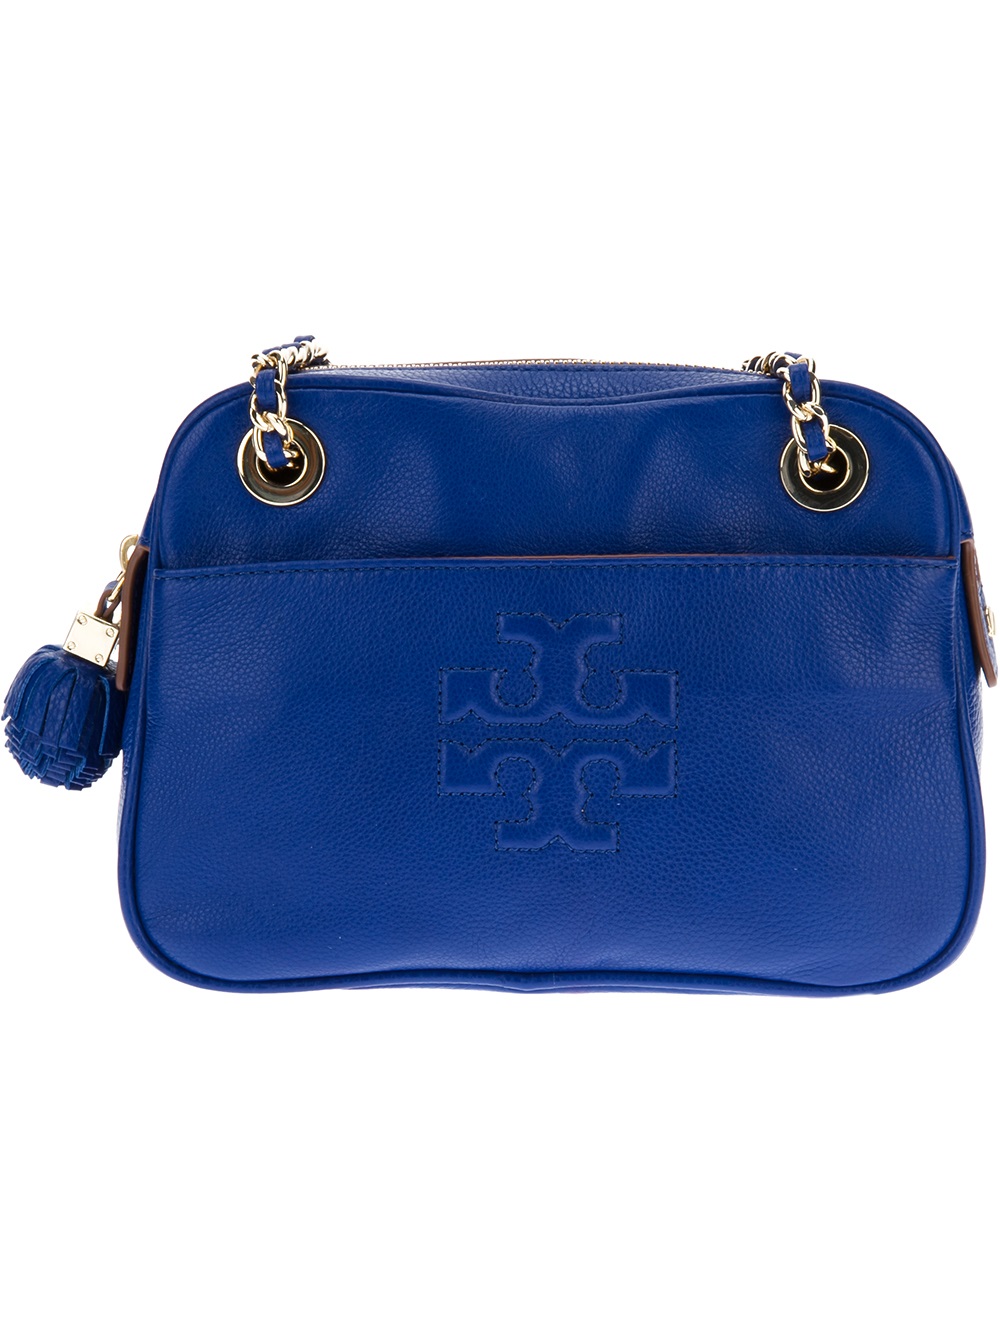 Tory burch Chain Link Shoulder Bag in Blue | Lyst